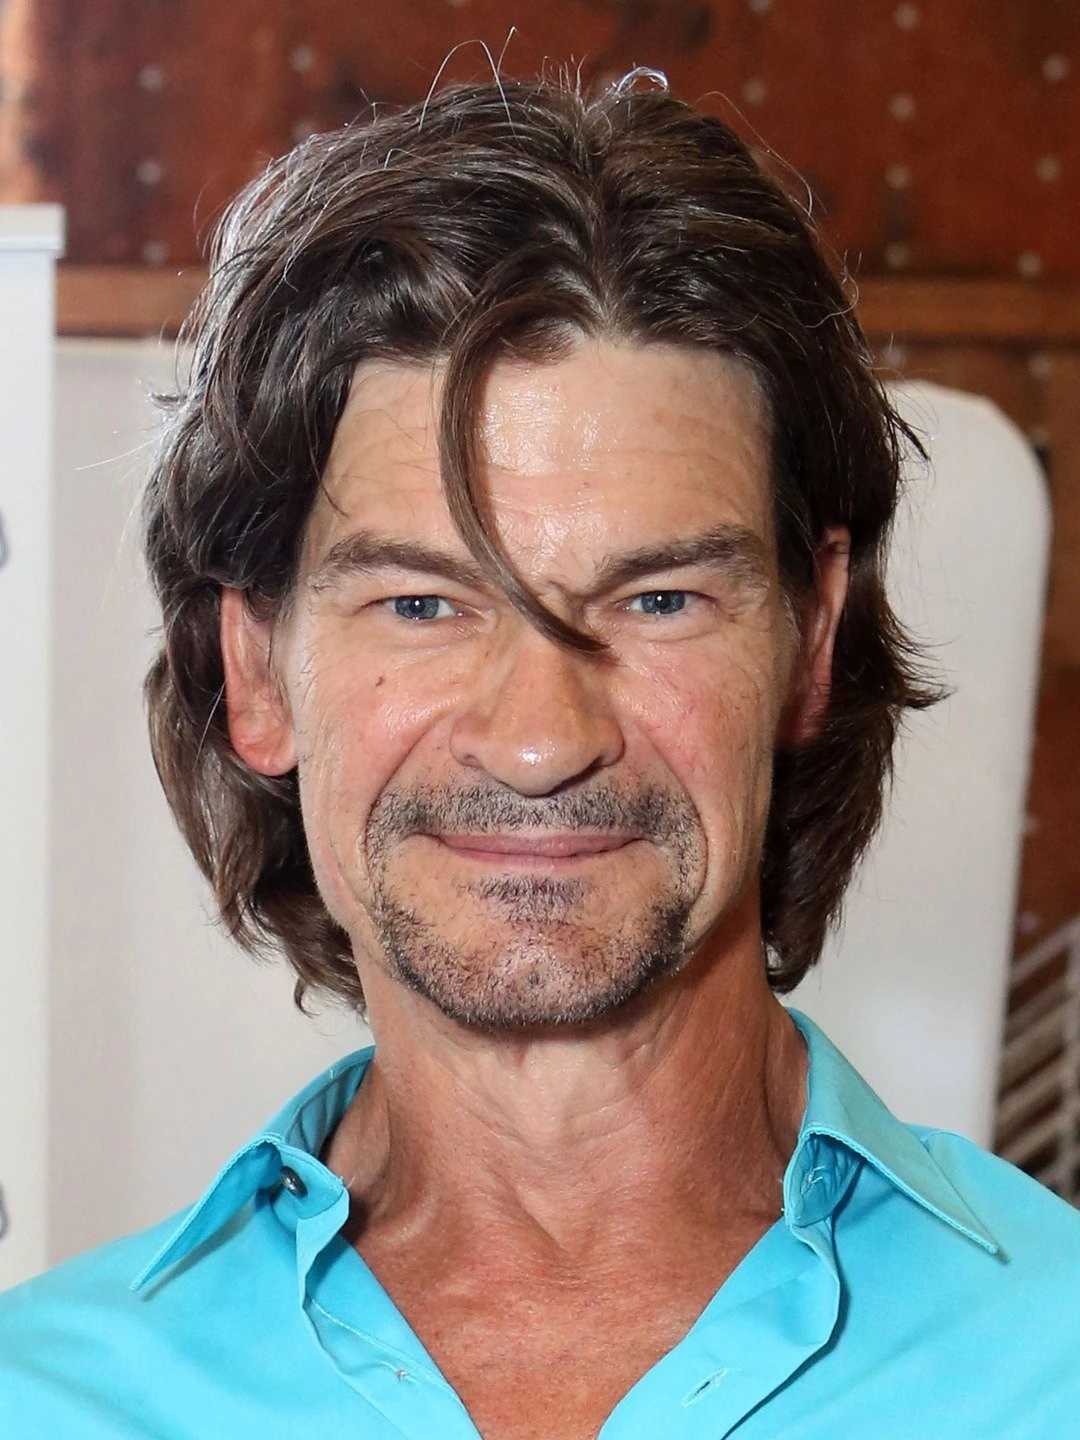 Who Is Don Swayze? All You Need To Know About Patrick Swayze’s Younger Brother